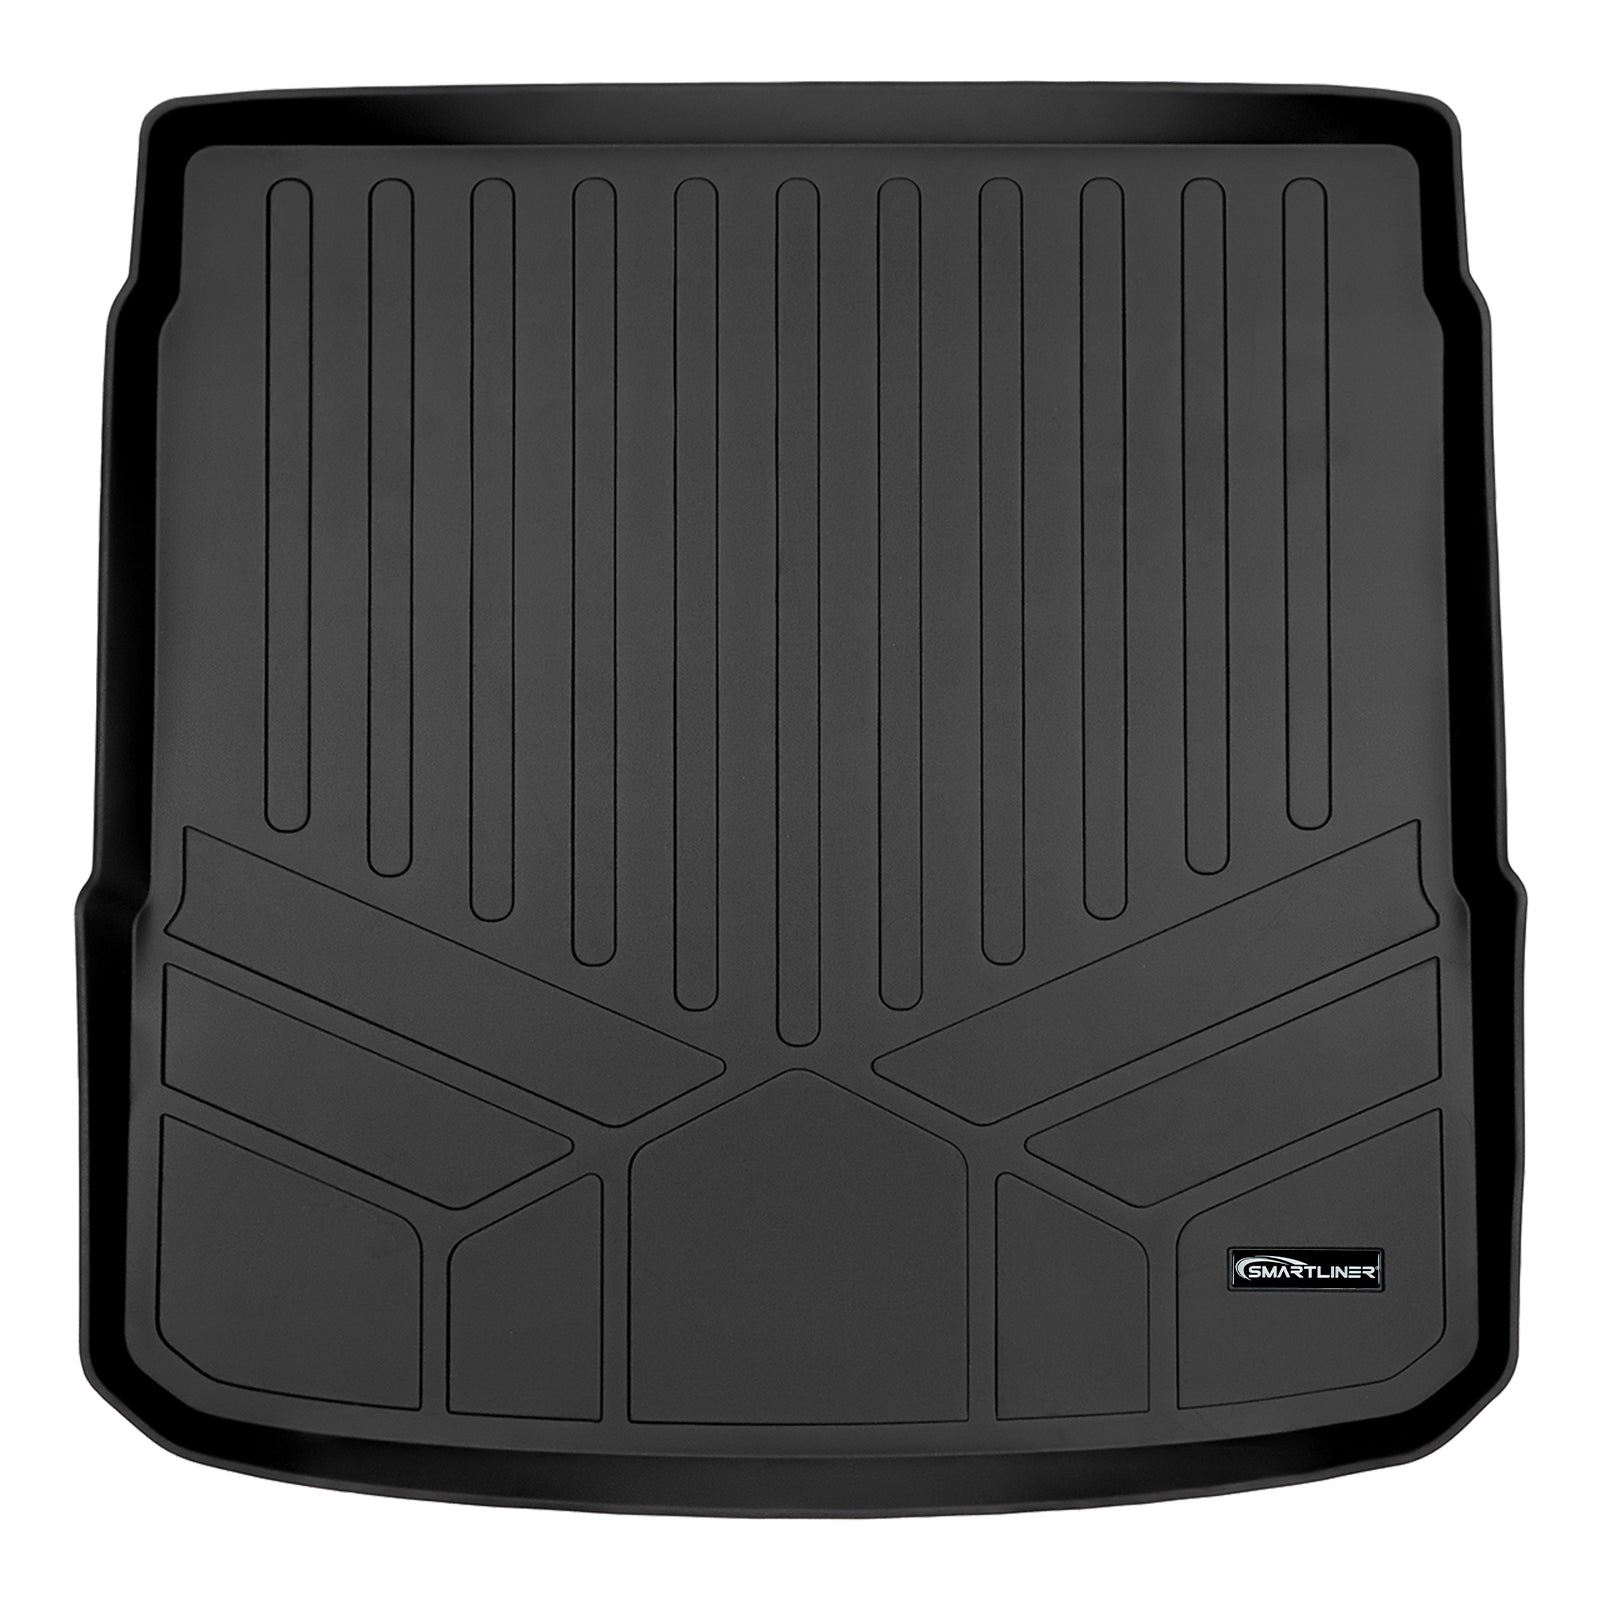 SMARTLINER Custom Fit Floor Liners For 2019-2024 Audi E-Tron / E-Tron Sportback (with 2nd Row Retention)